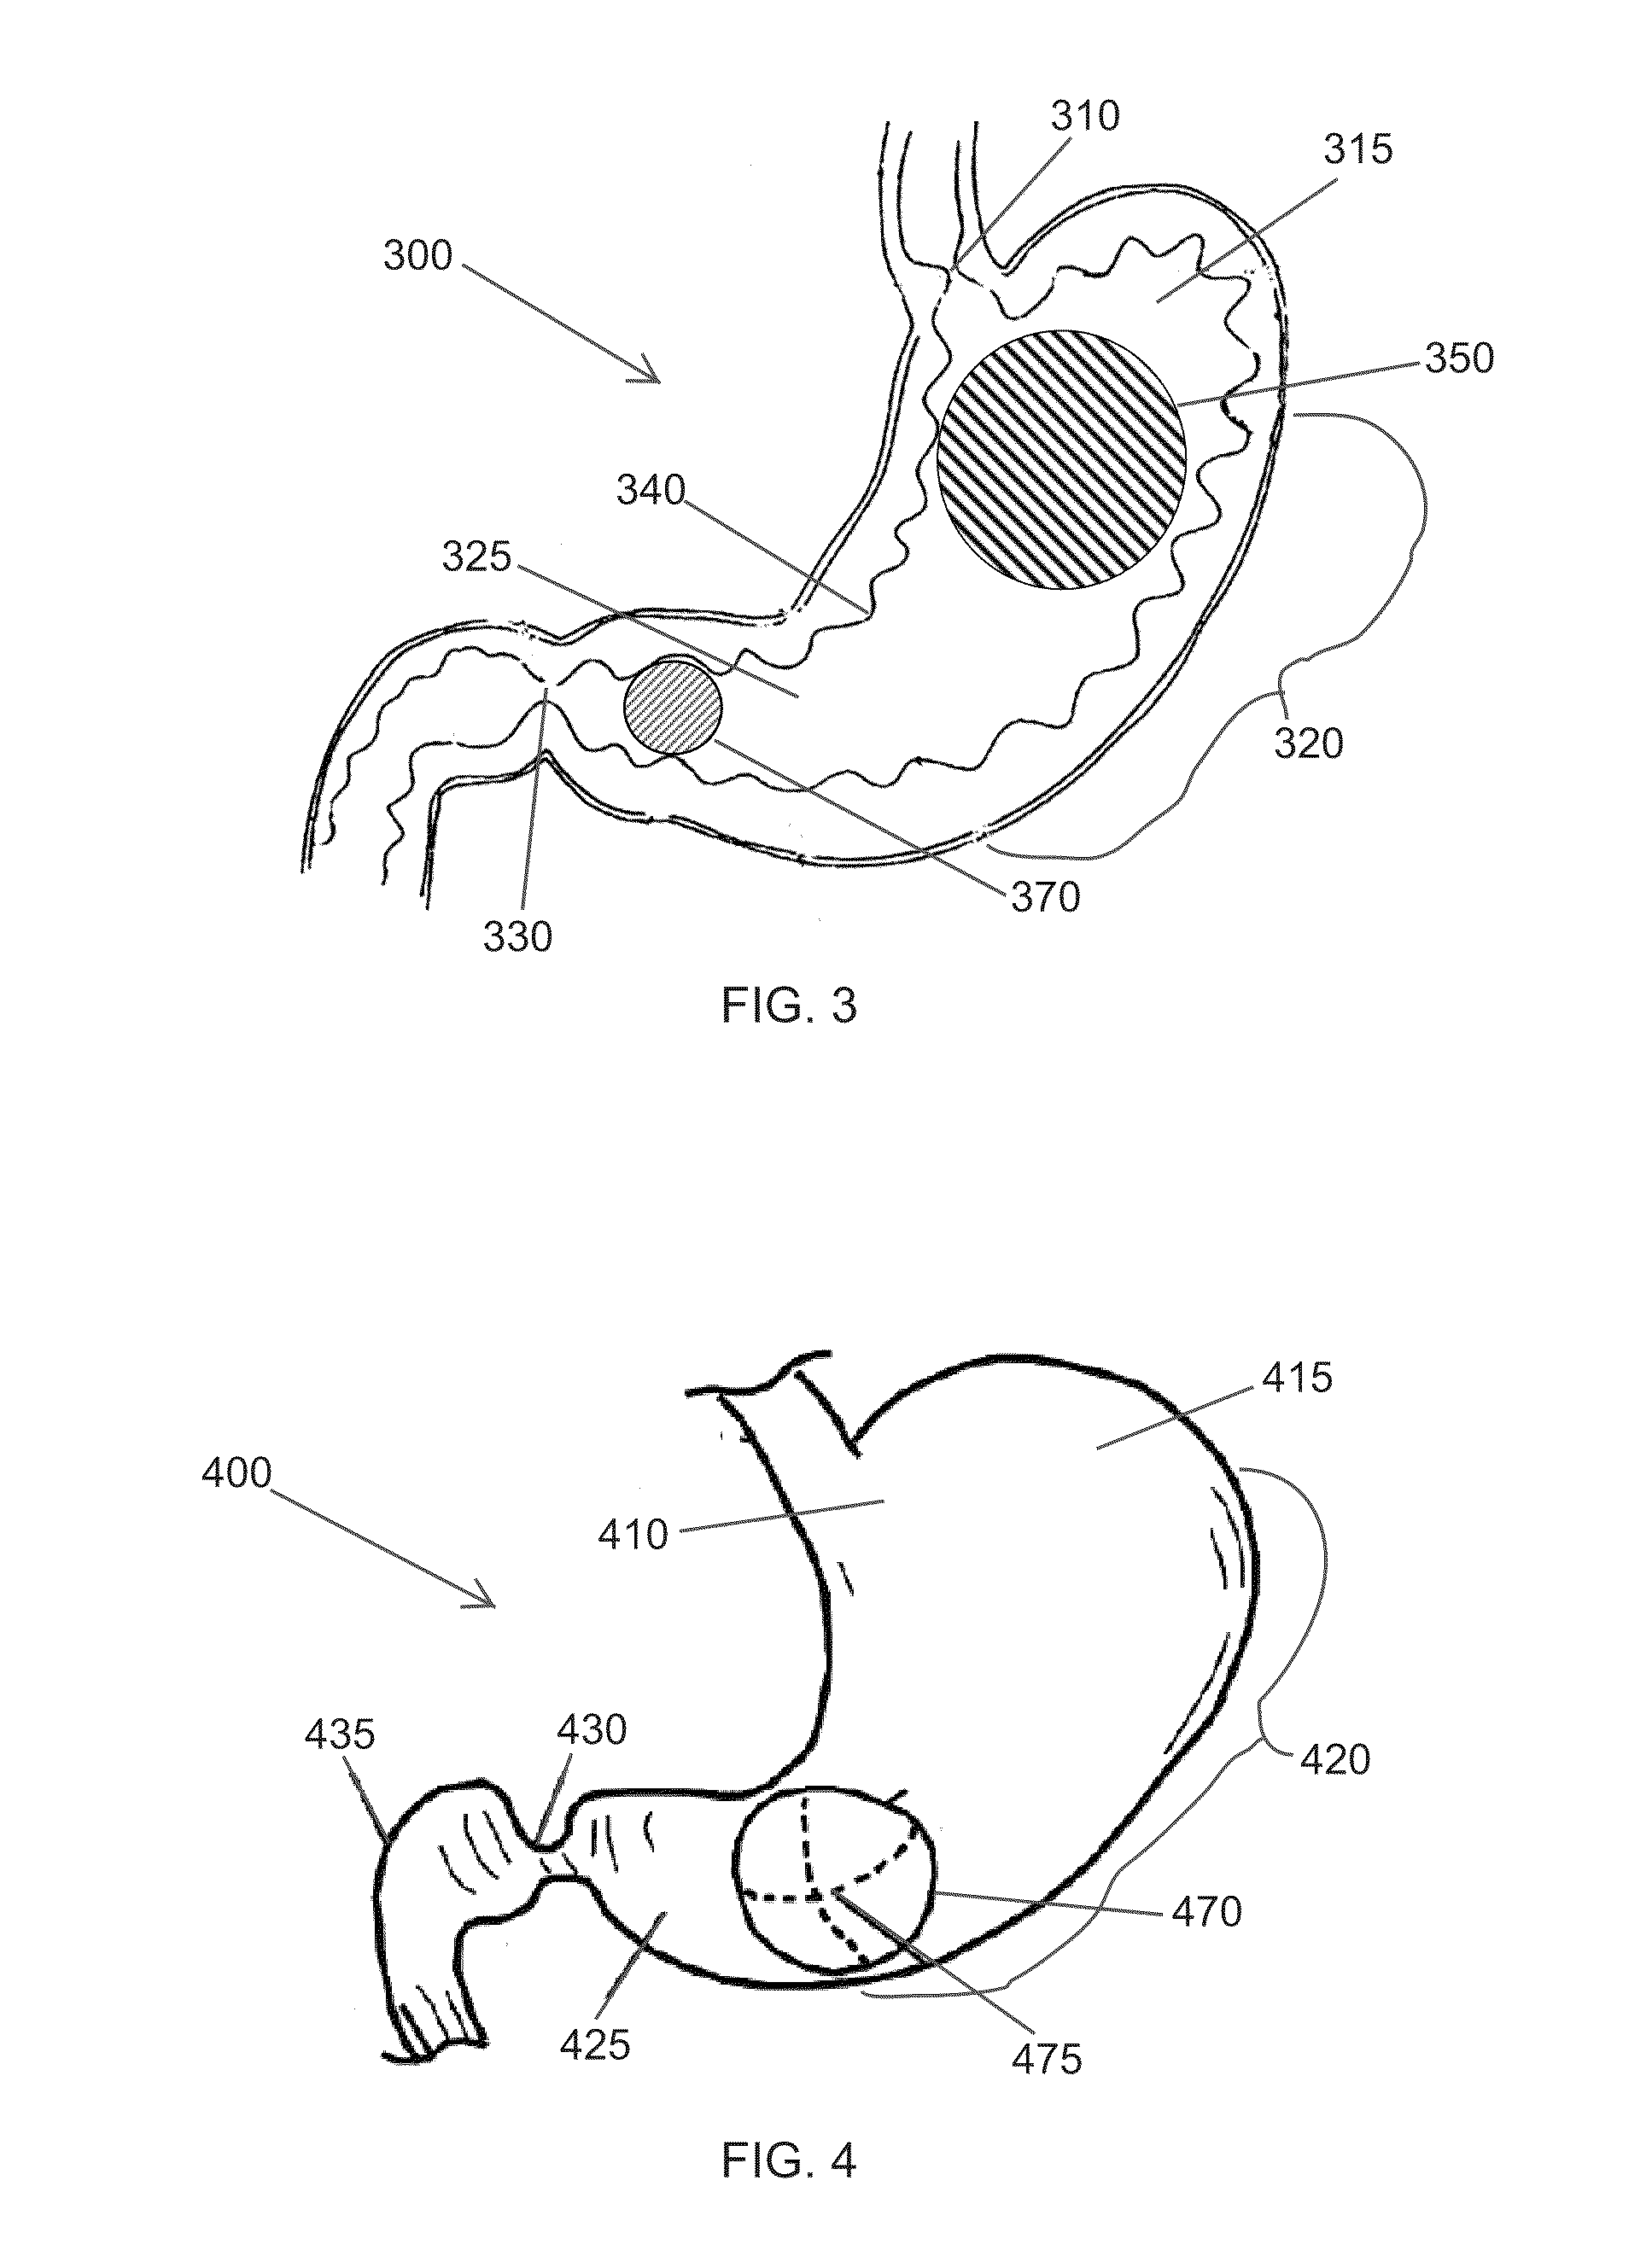 High specific gravity intragastric device